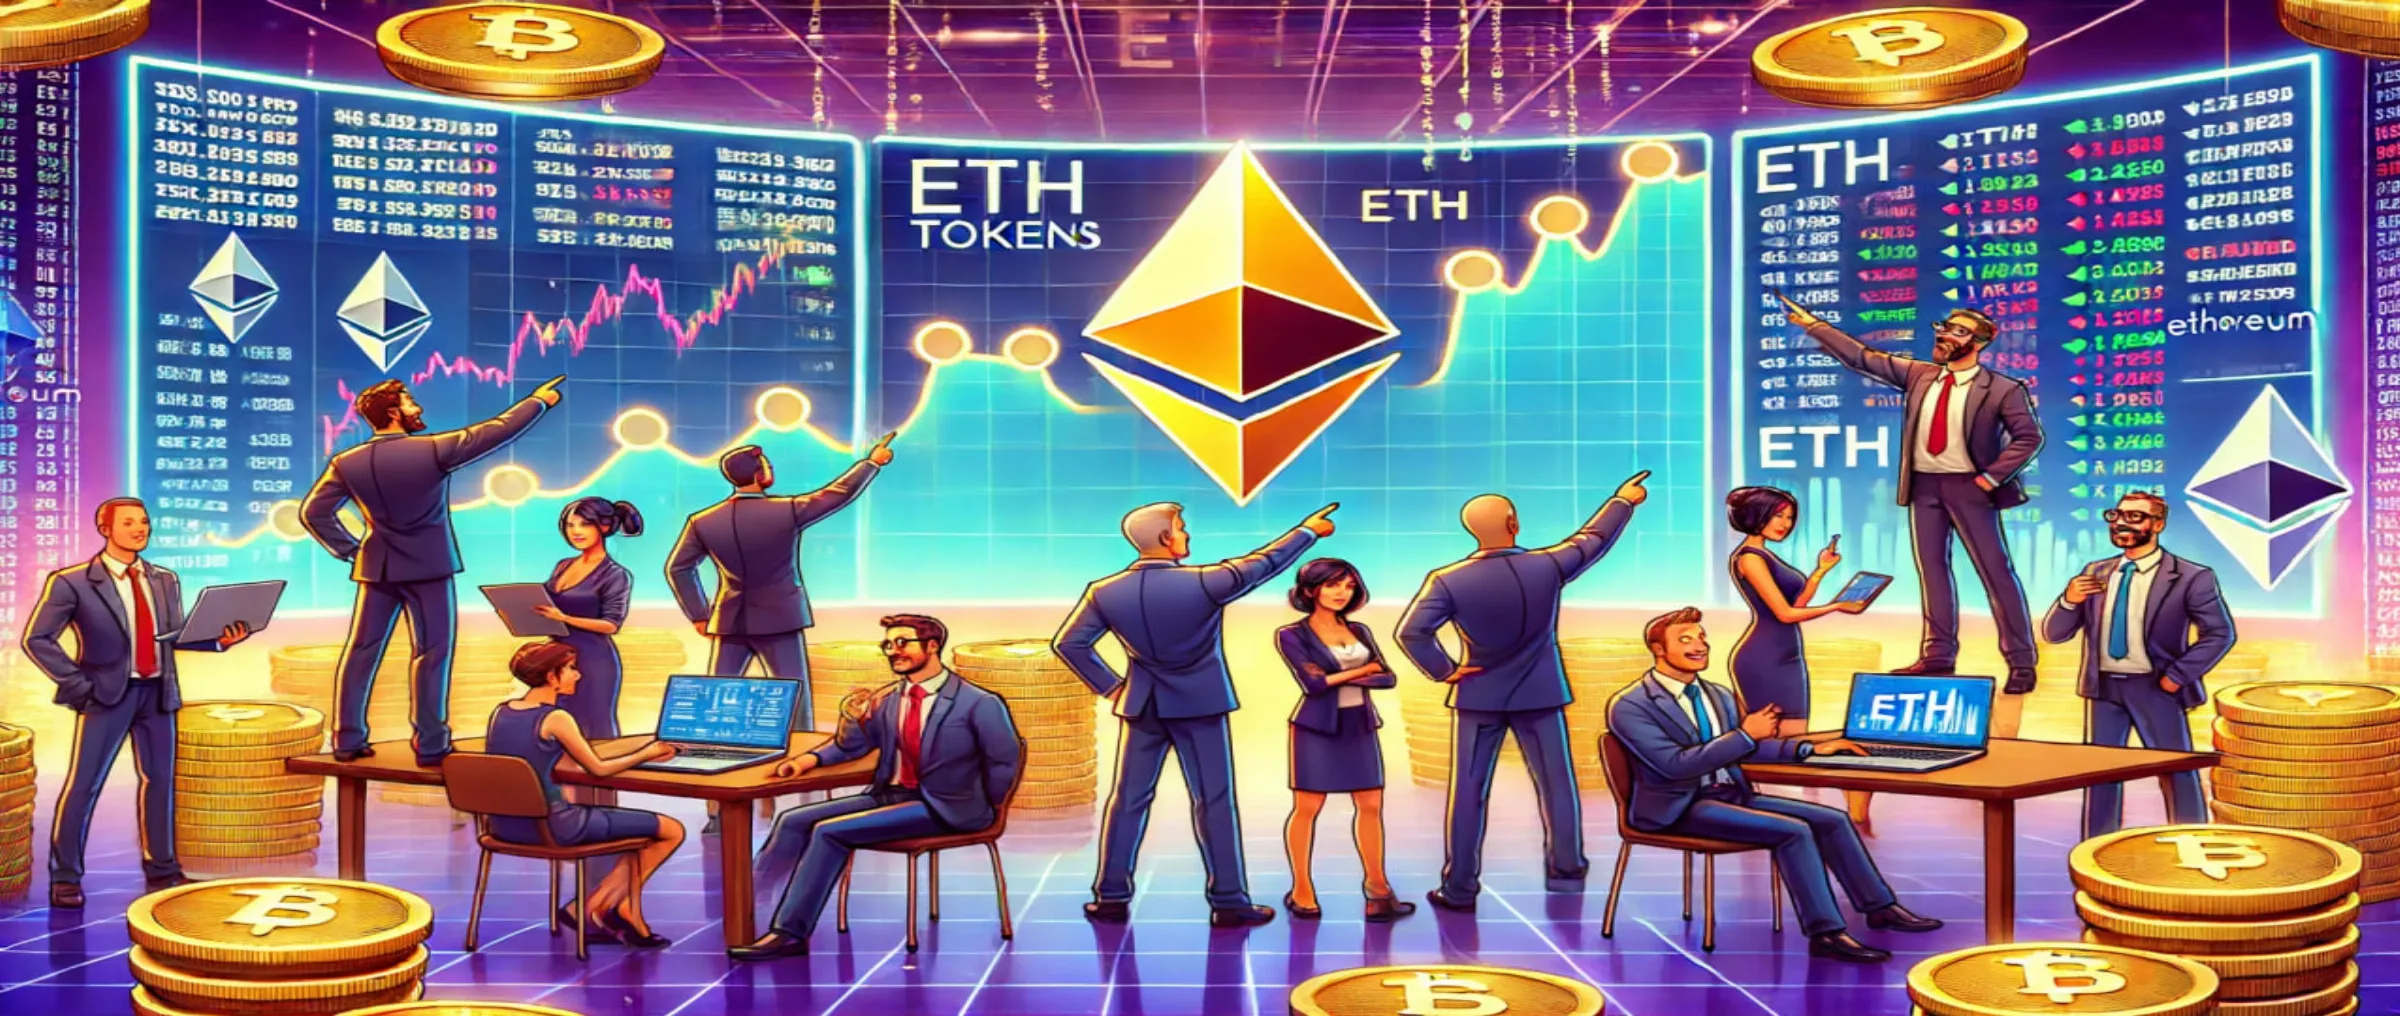 Large investors are actively buying ETH